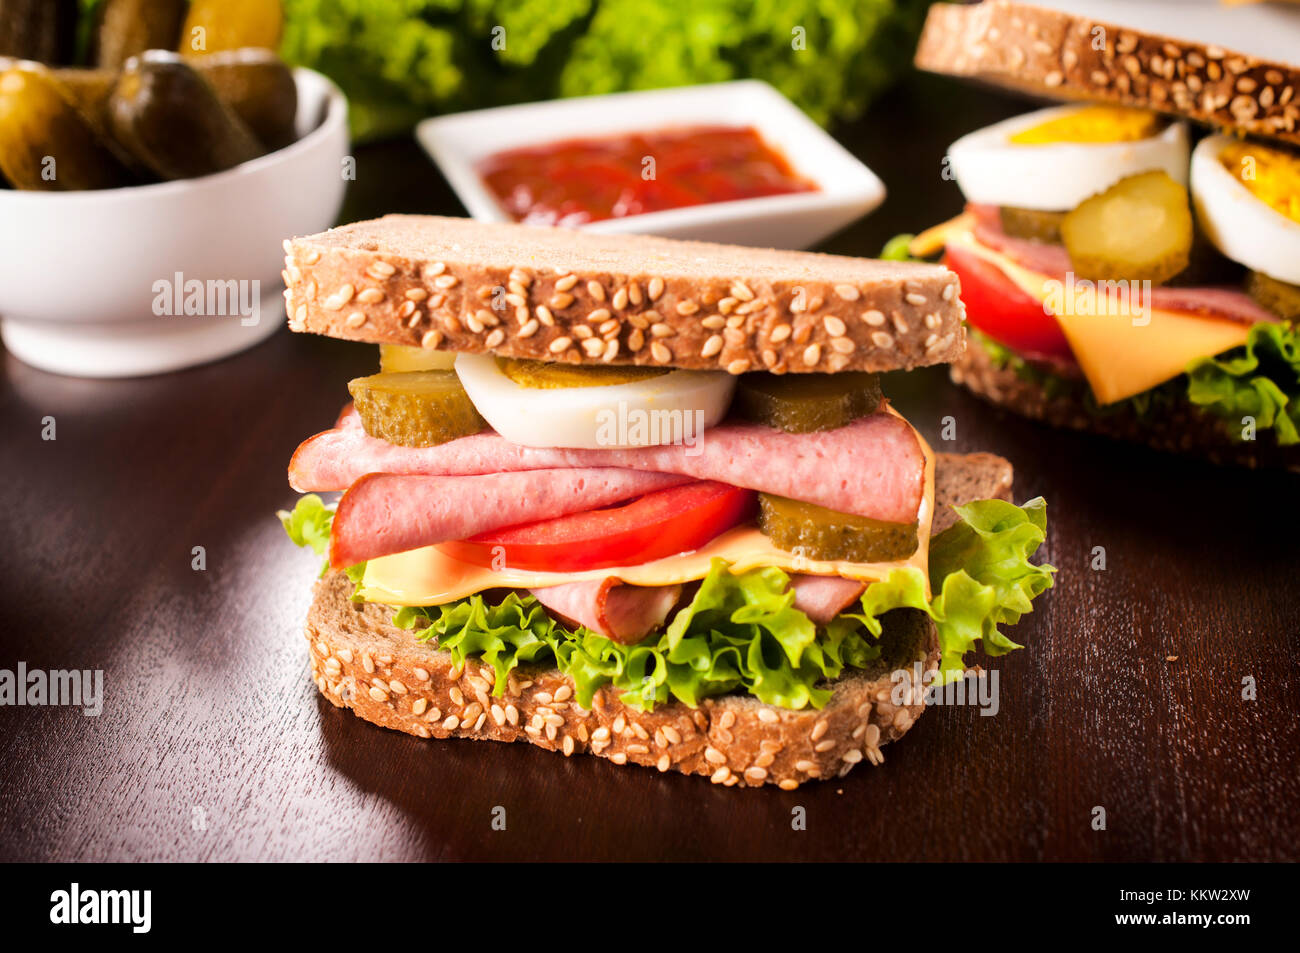 Tasty big sausage sandwich on the wooden table Stock Photo